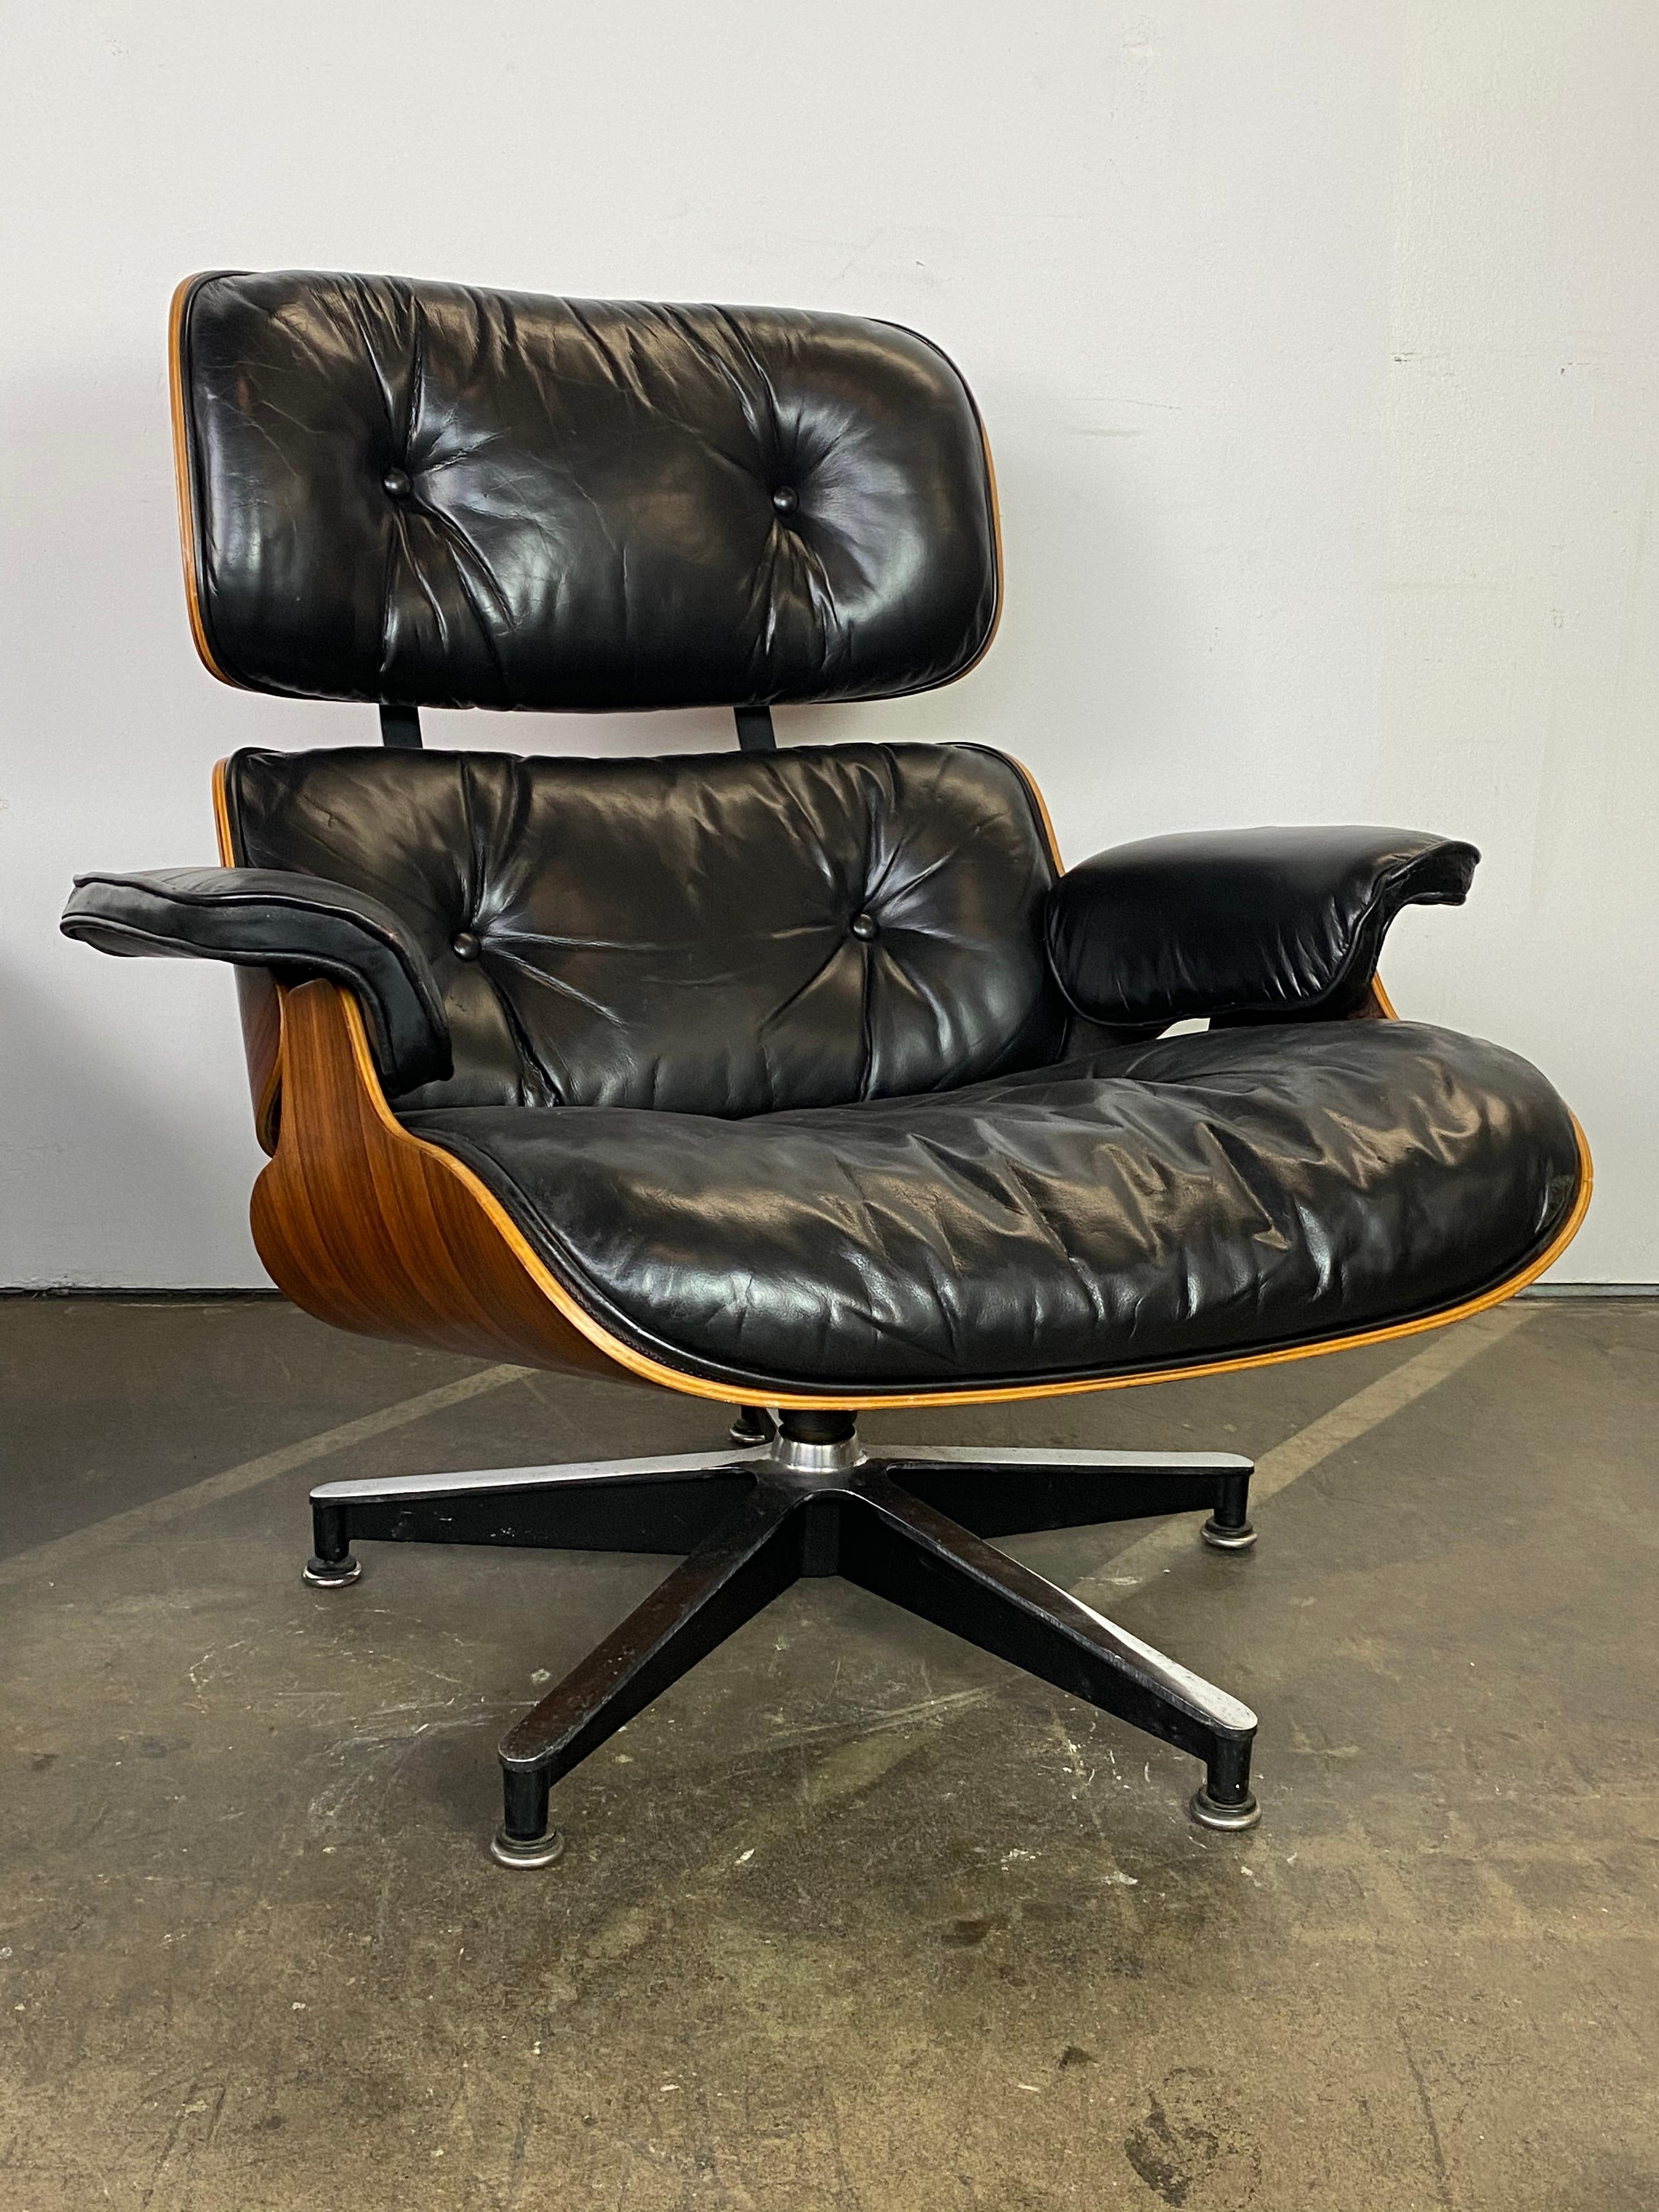 Gorgeous vintage Eames chair and. Authentic and original.